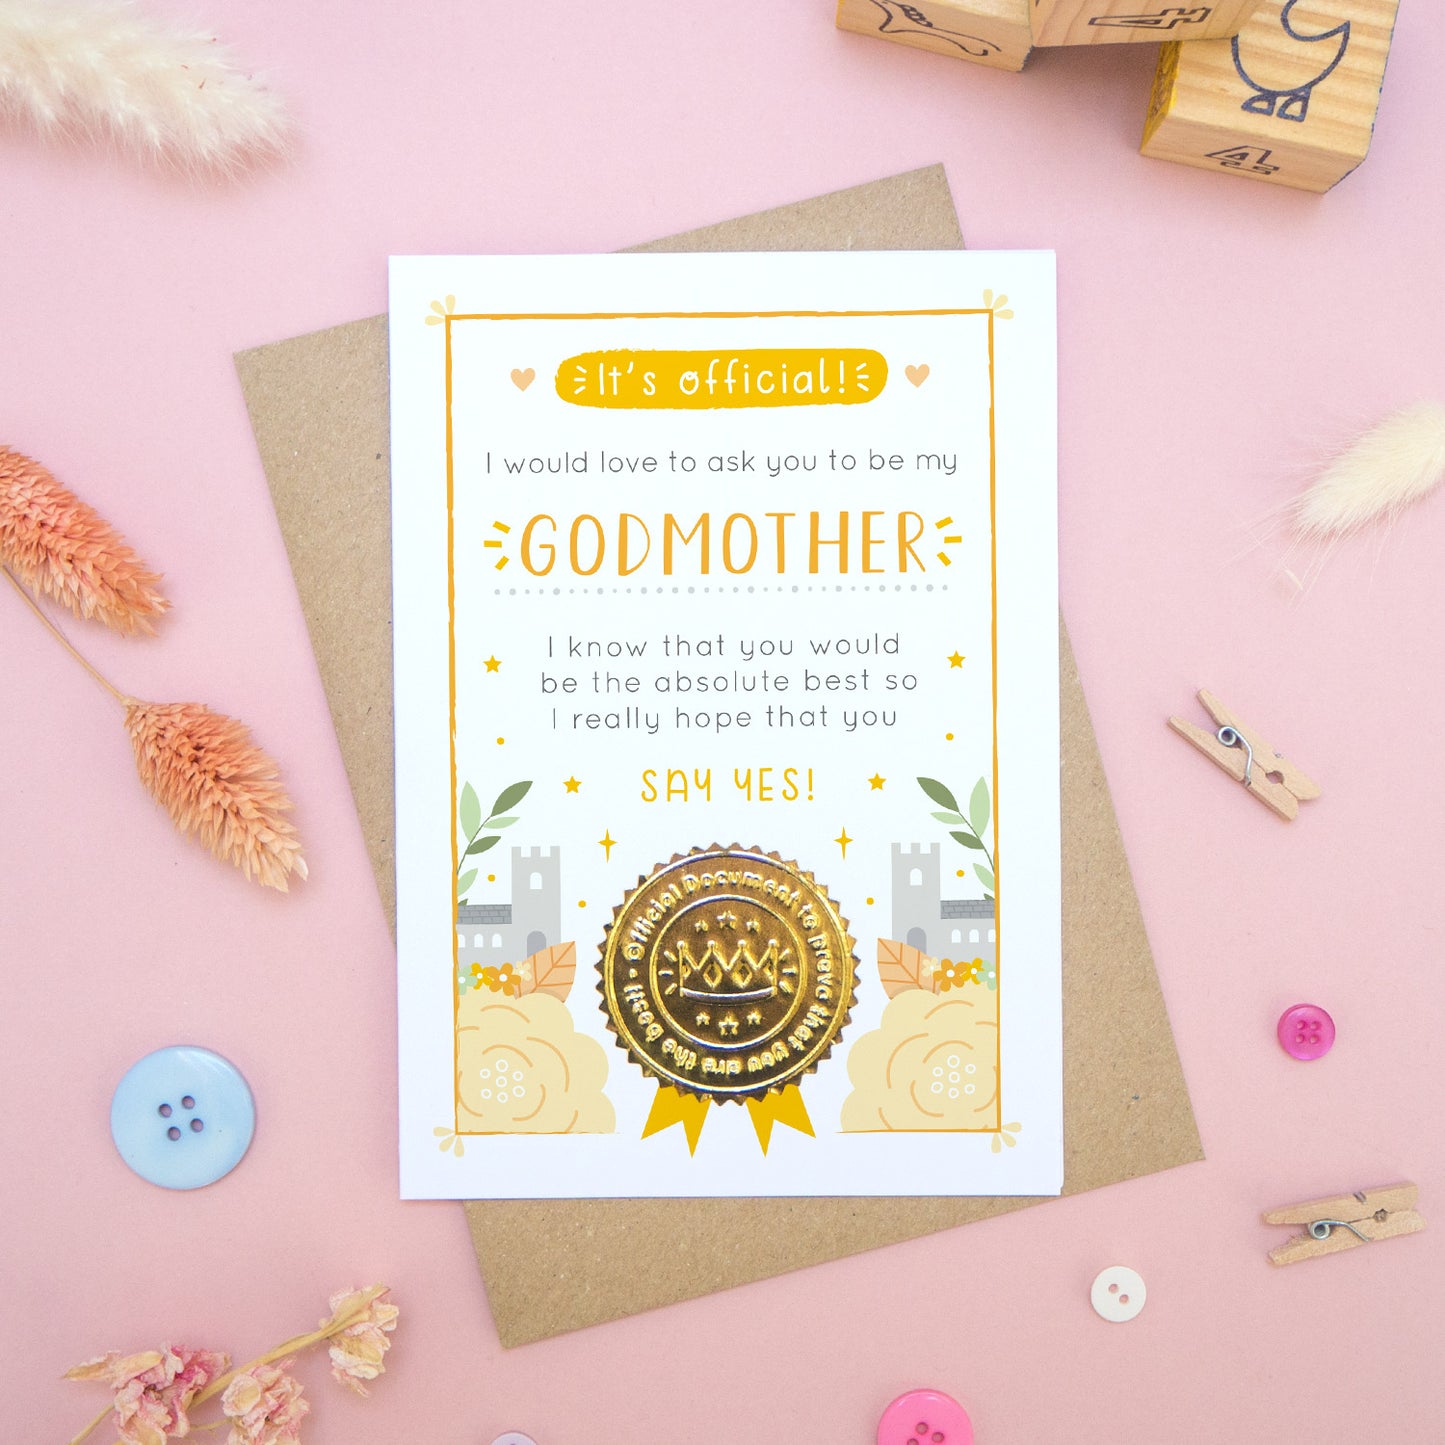 A will you be my godmother card in orange, shot on a pink background surrounded by dry flowers, buttons and building blocks.